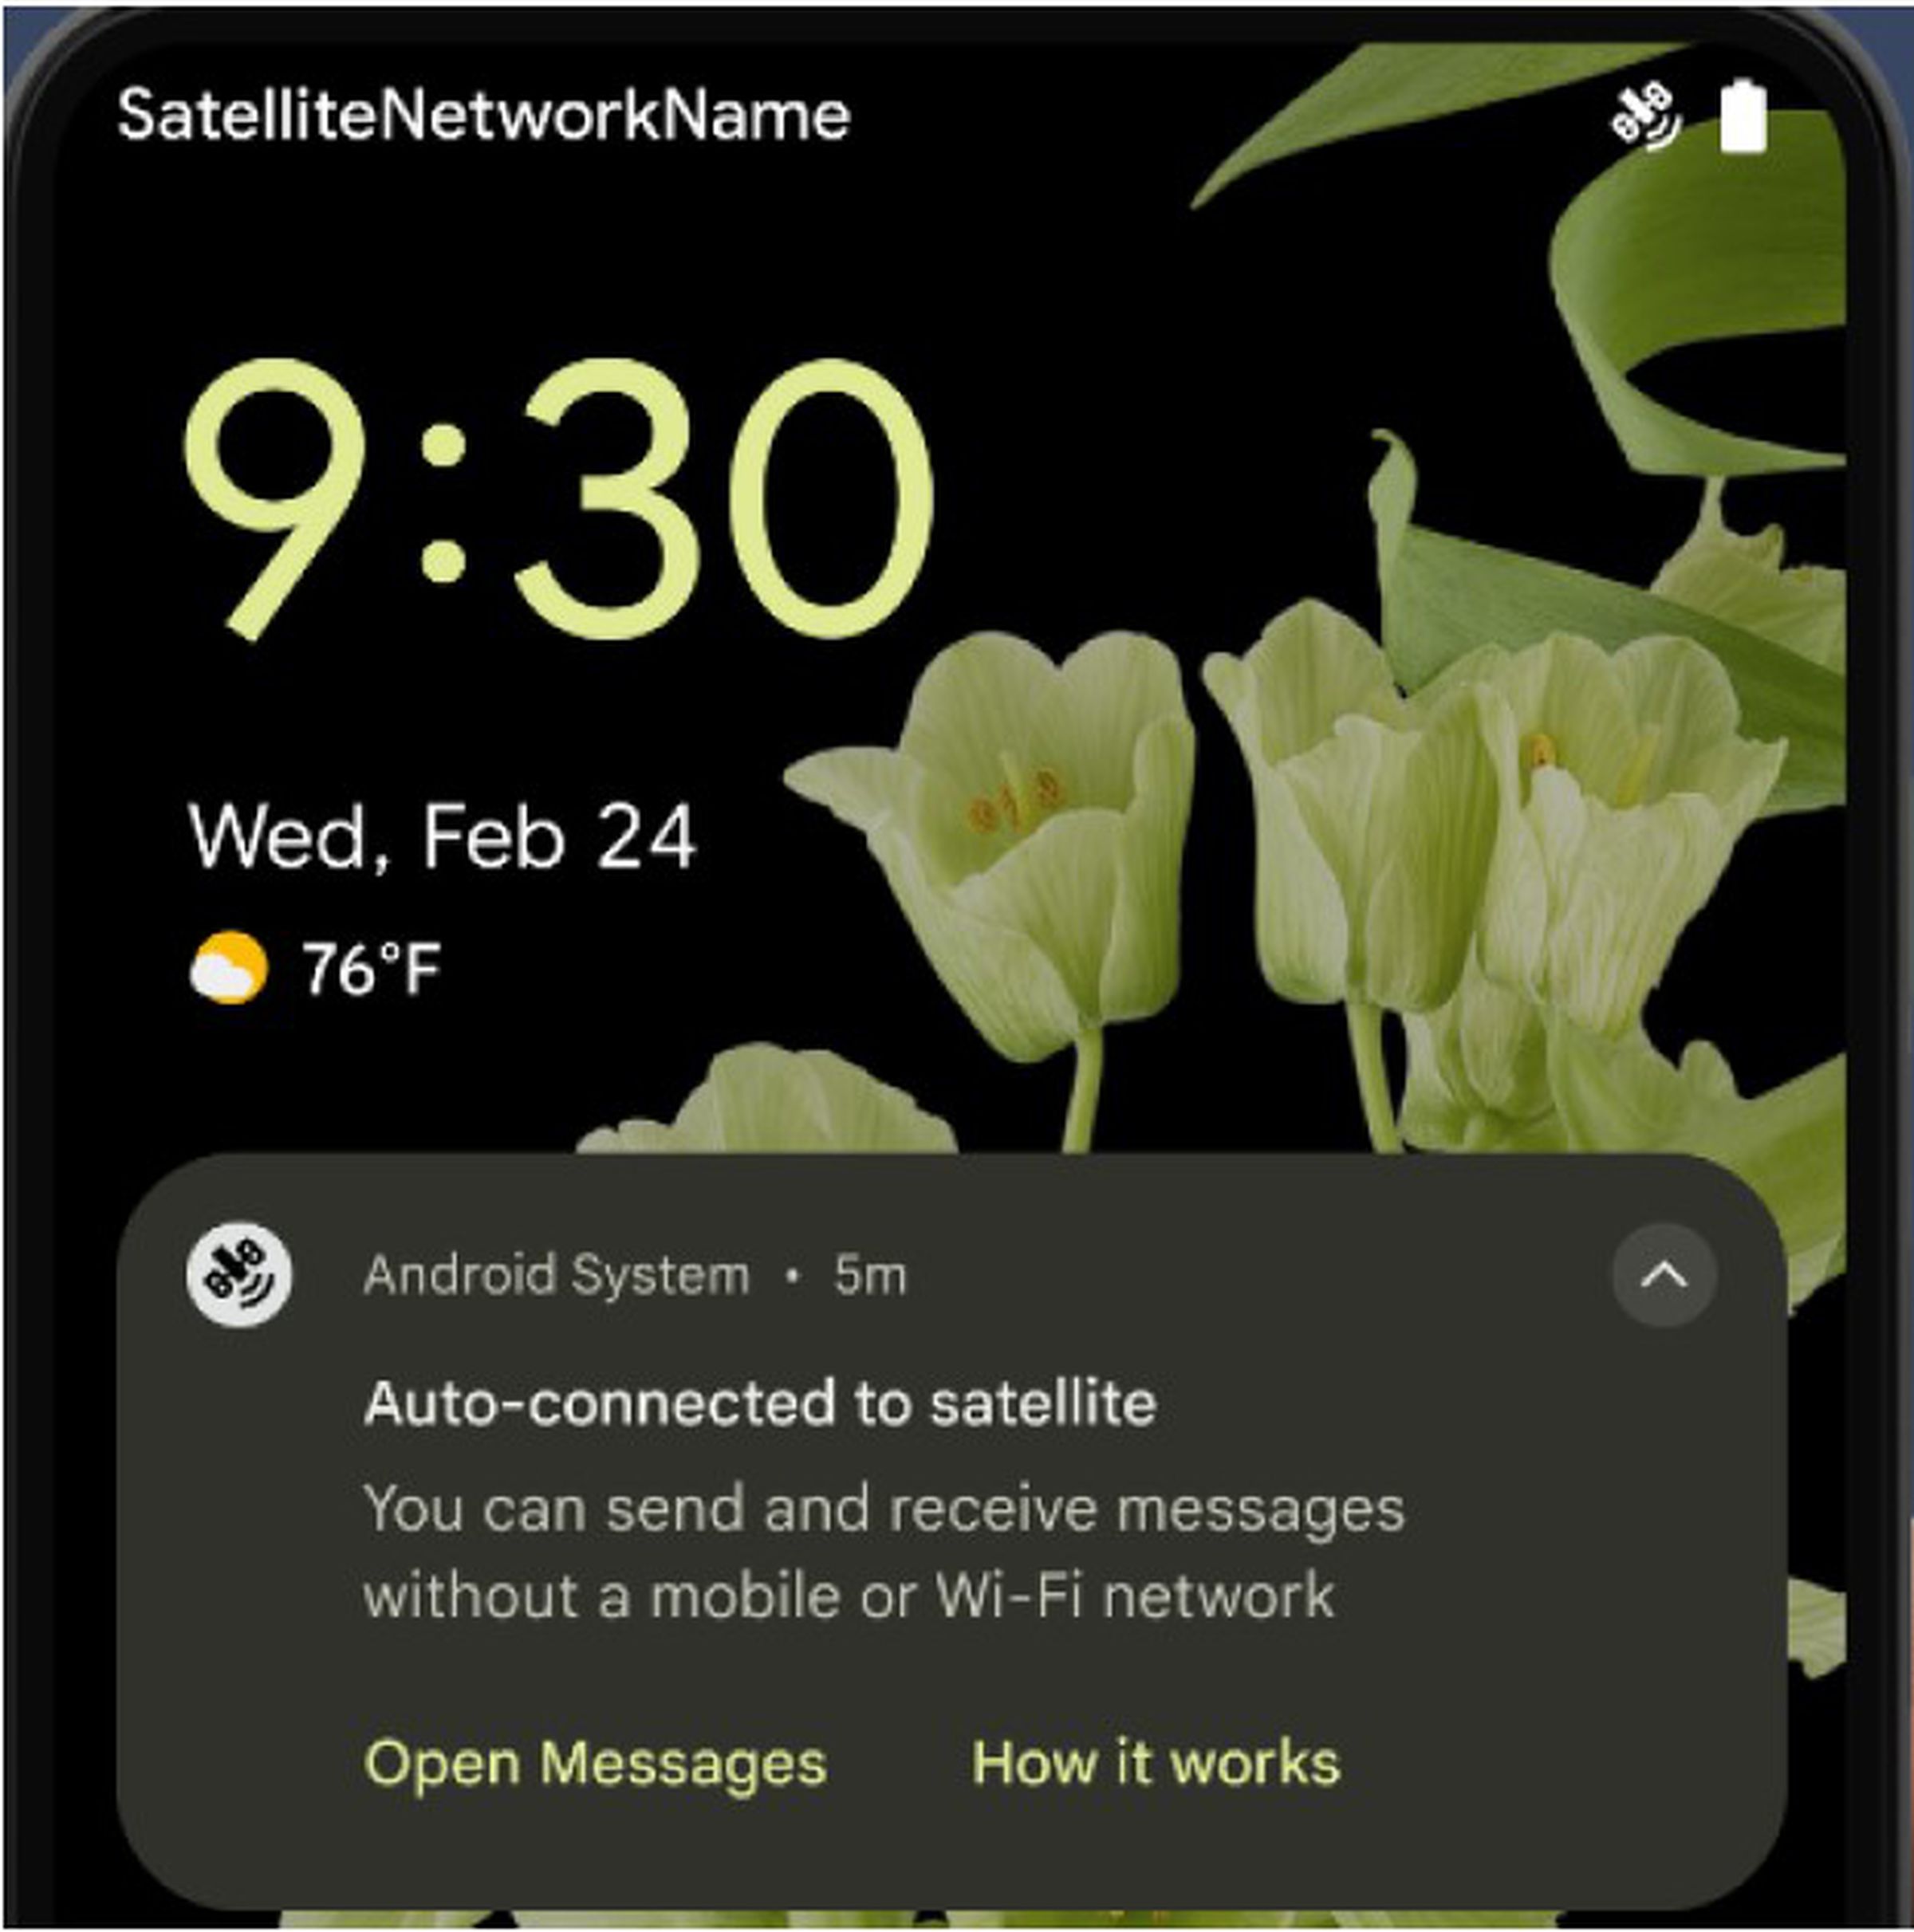 A screenshot of an Android smartphone displaying an “auto-connected to satellite” message.